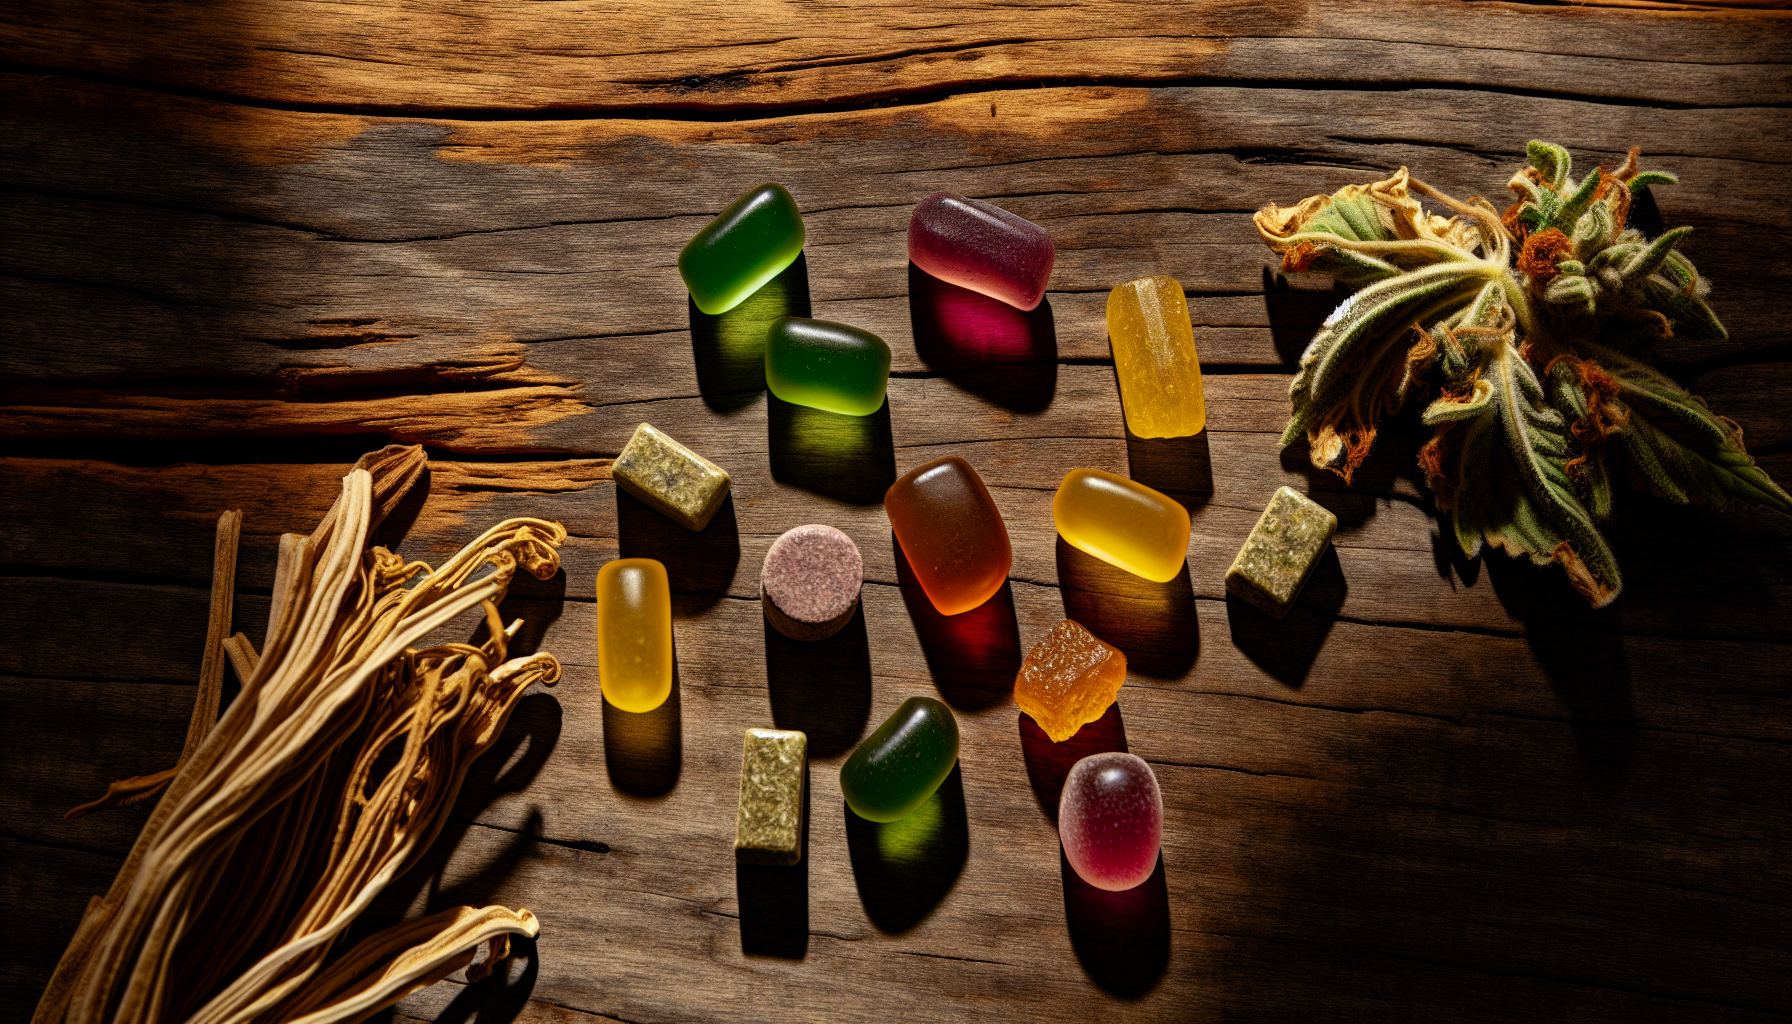 CBD-infused multivitamin gummies and natural herbs